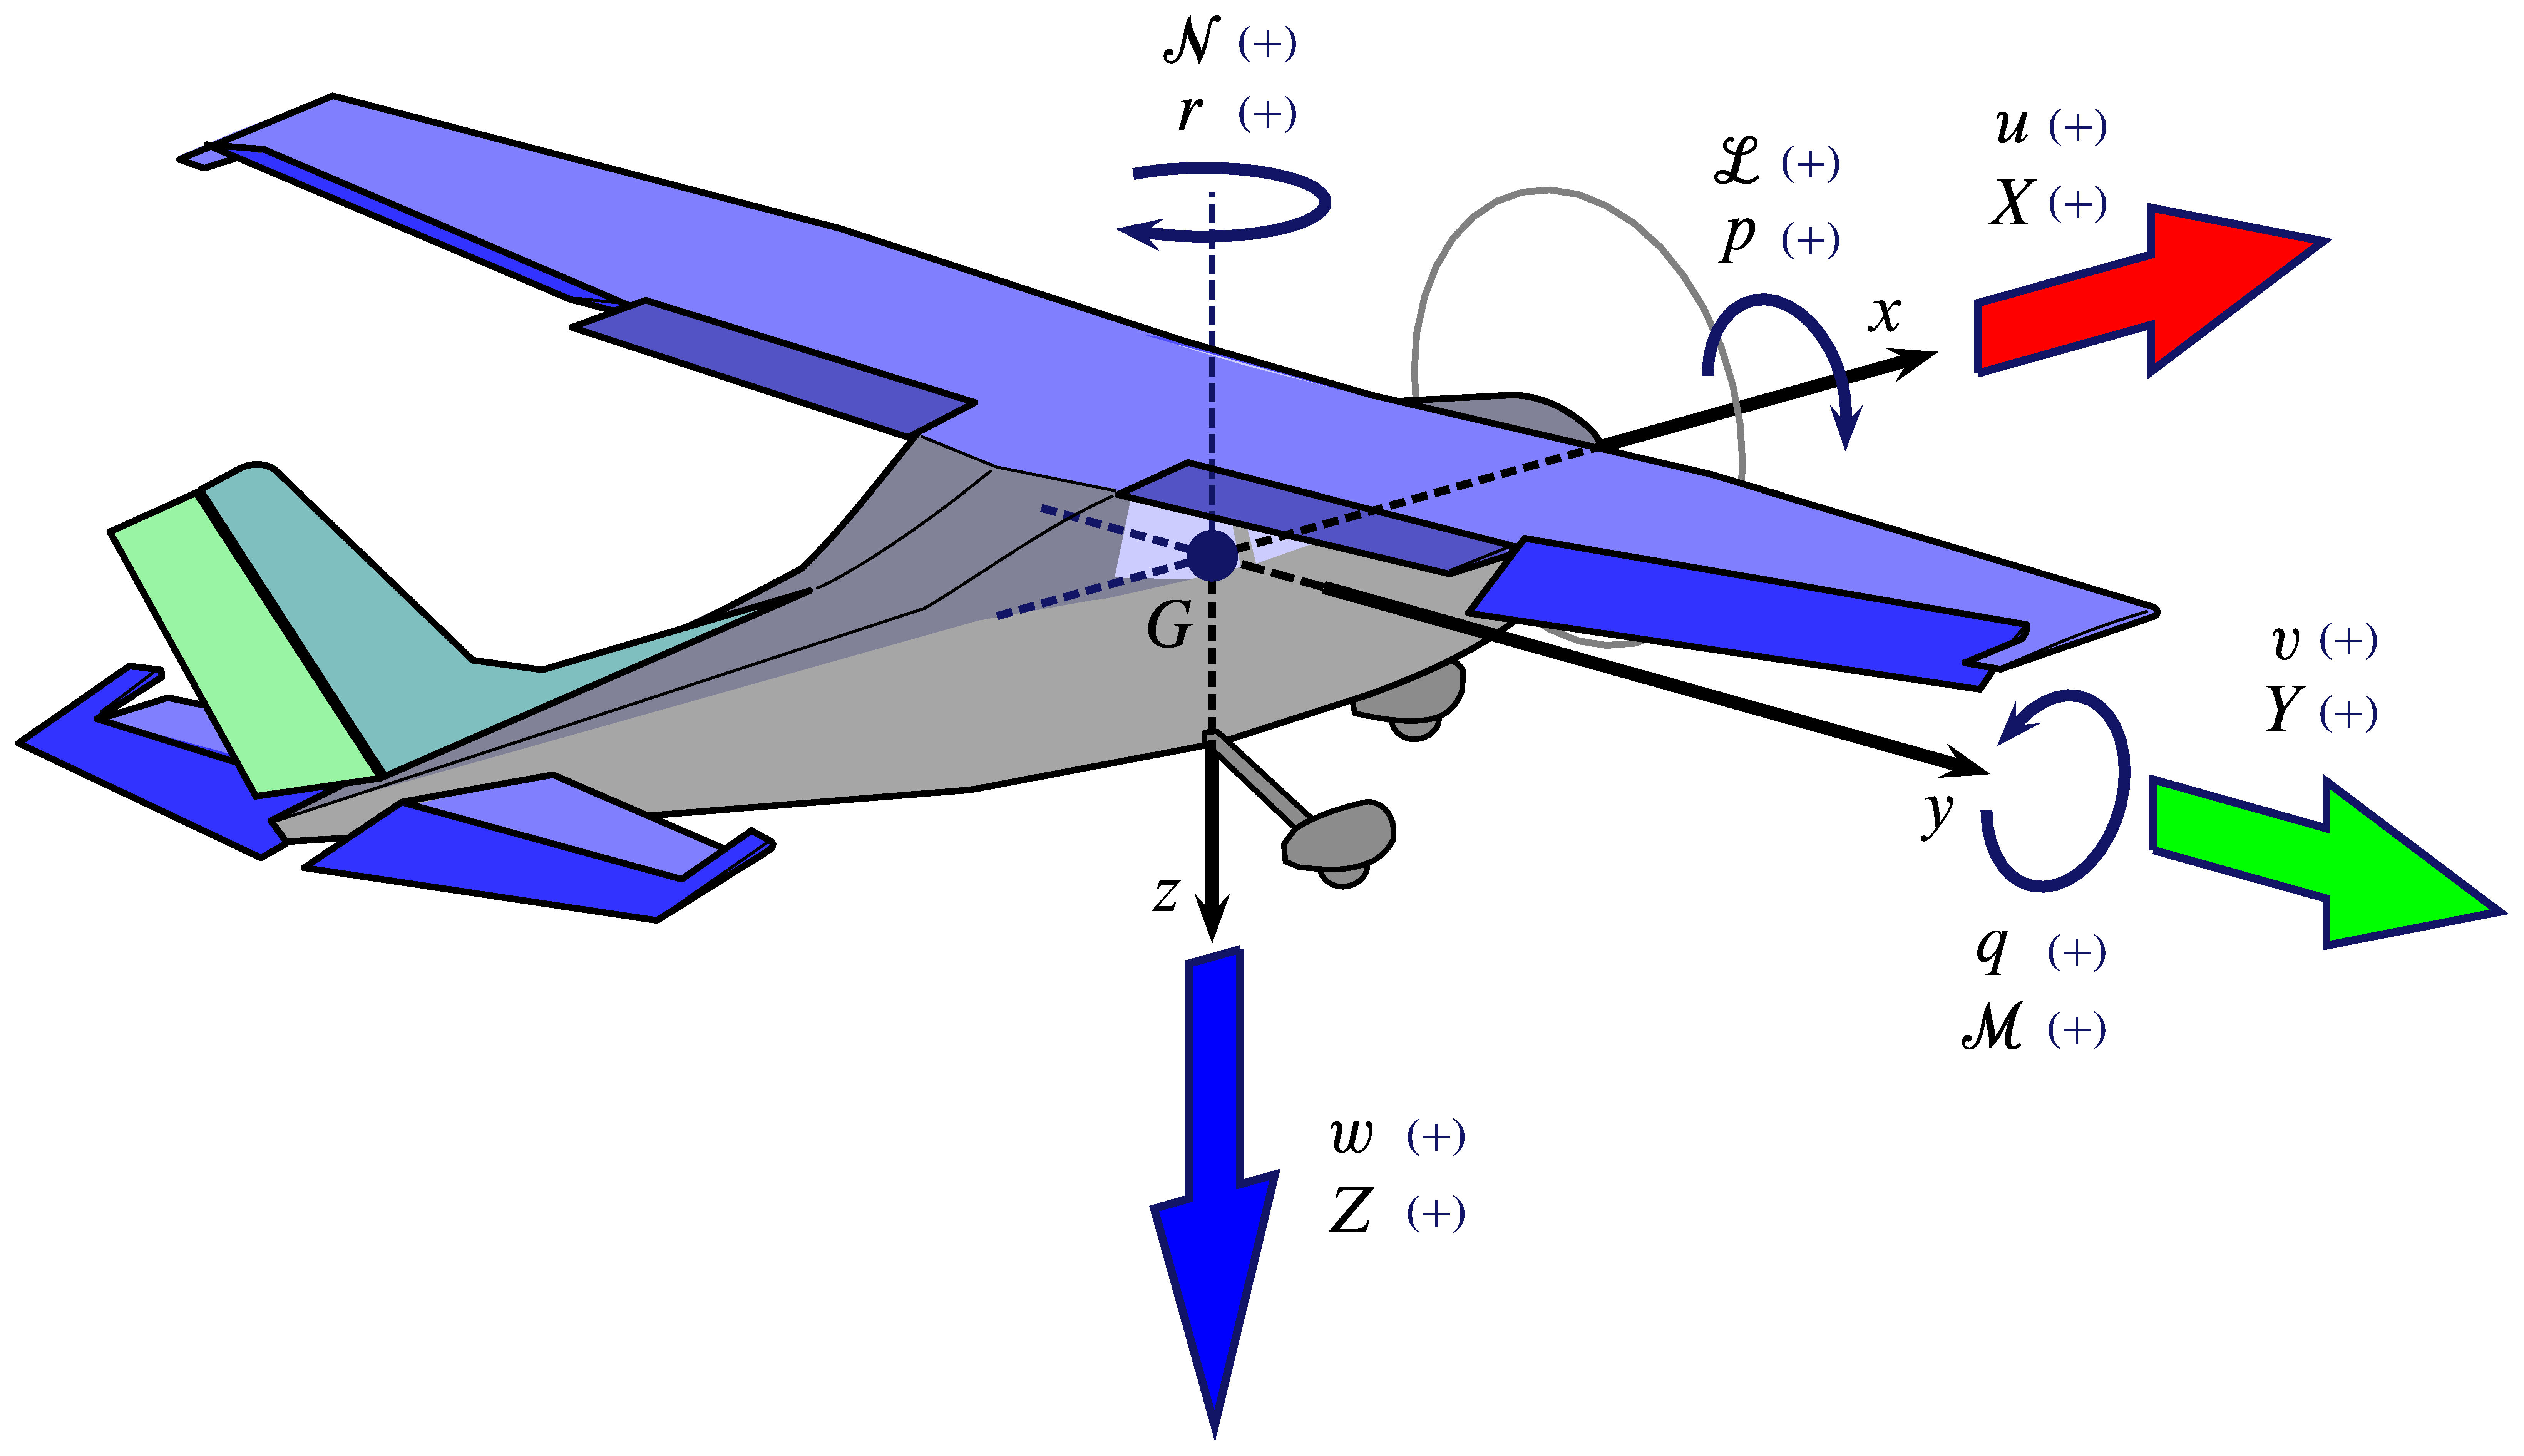 Linear and angular speed components, force and moment components in aircraft body-fixed frame.